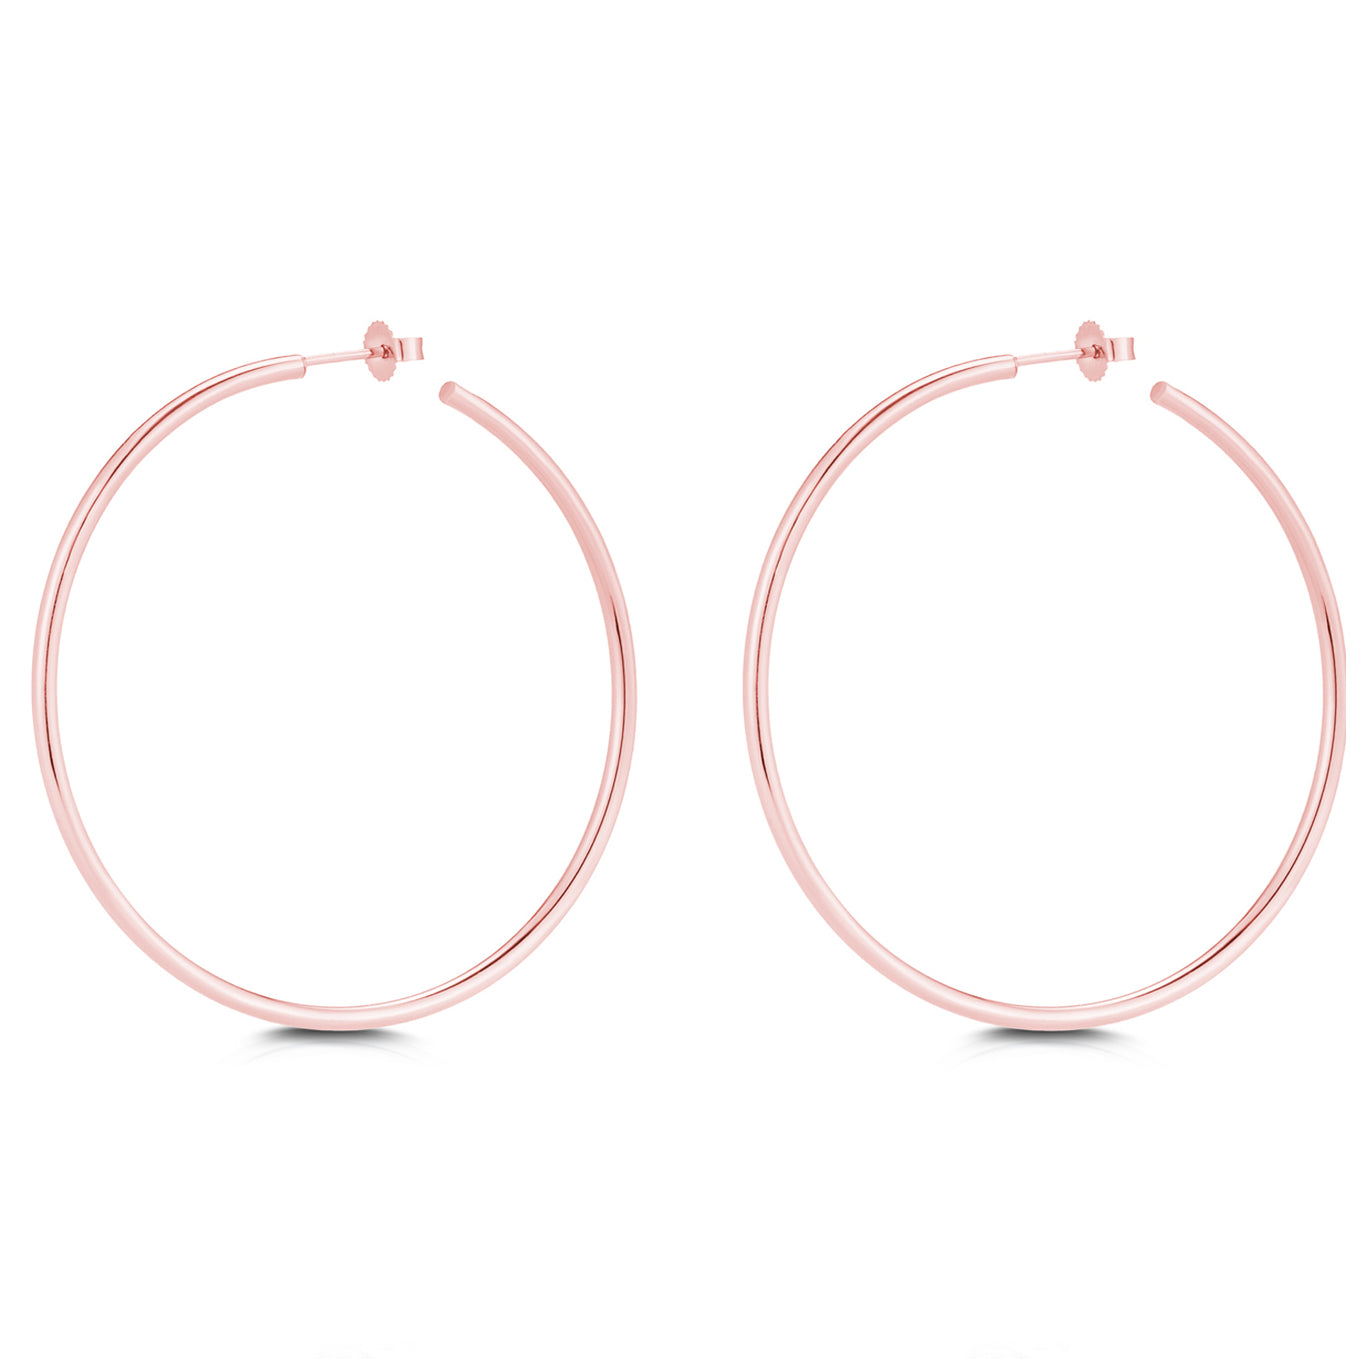 Small Hoop Silver/Rose Gold Cat Earrings - NEW!!!